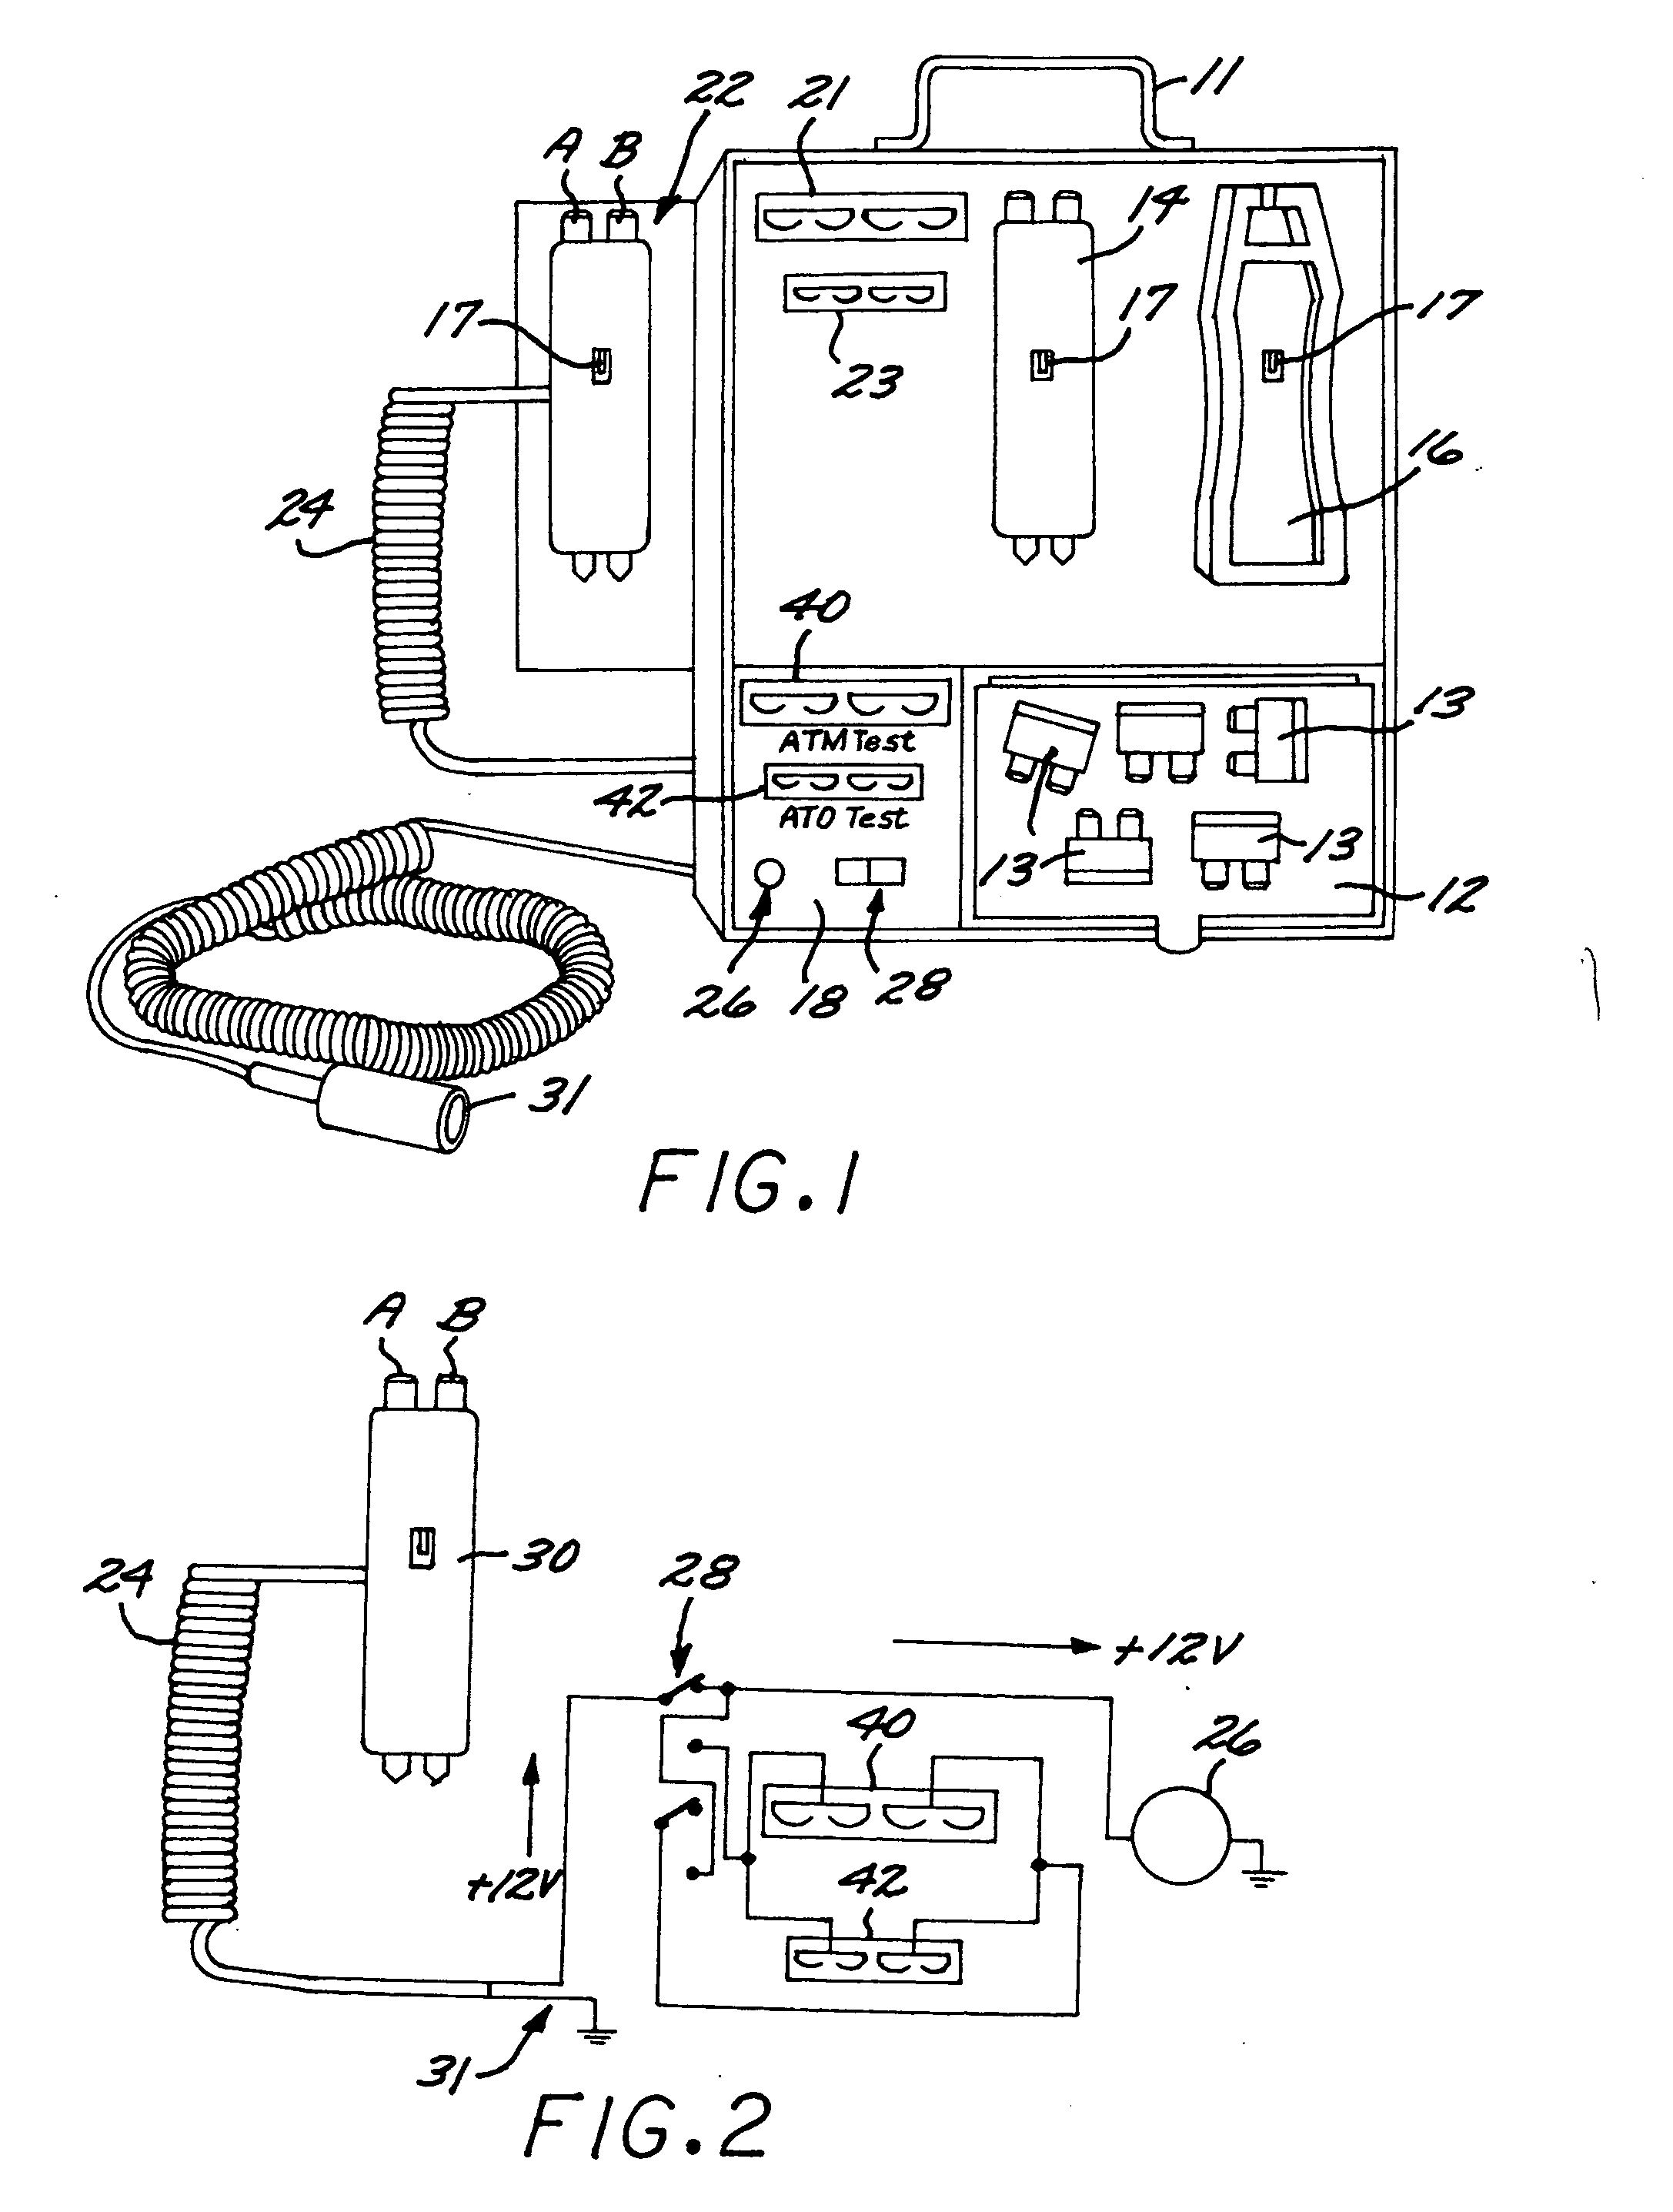 Caddy for fuse related items including fuse prong and receptacle cleaning tools